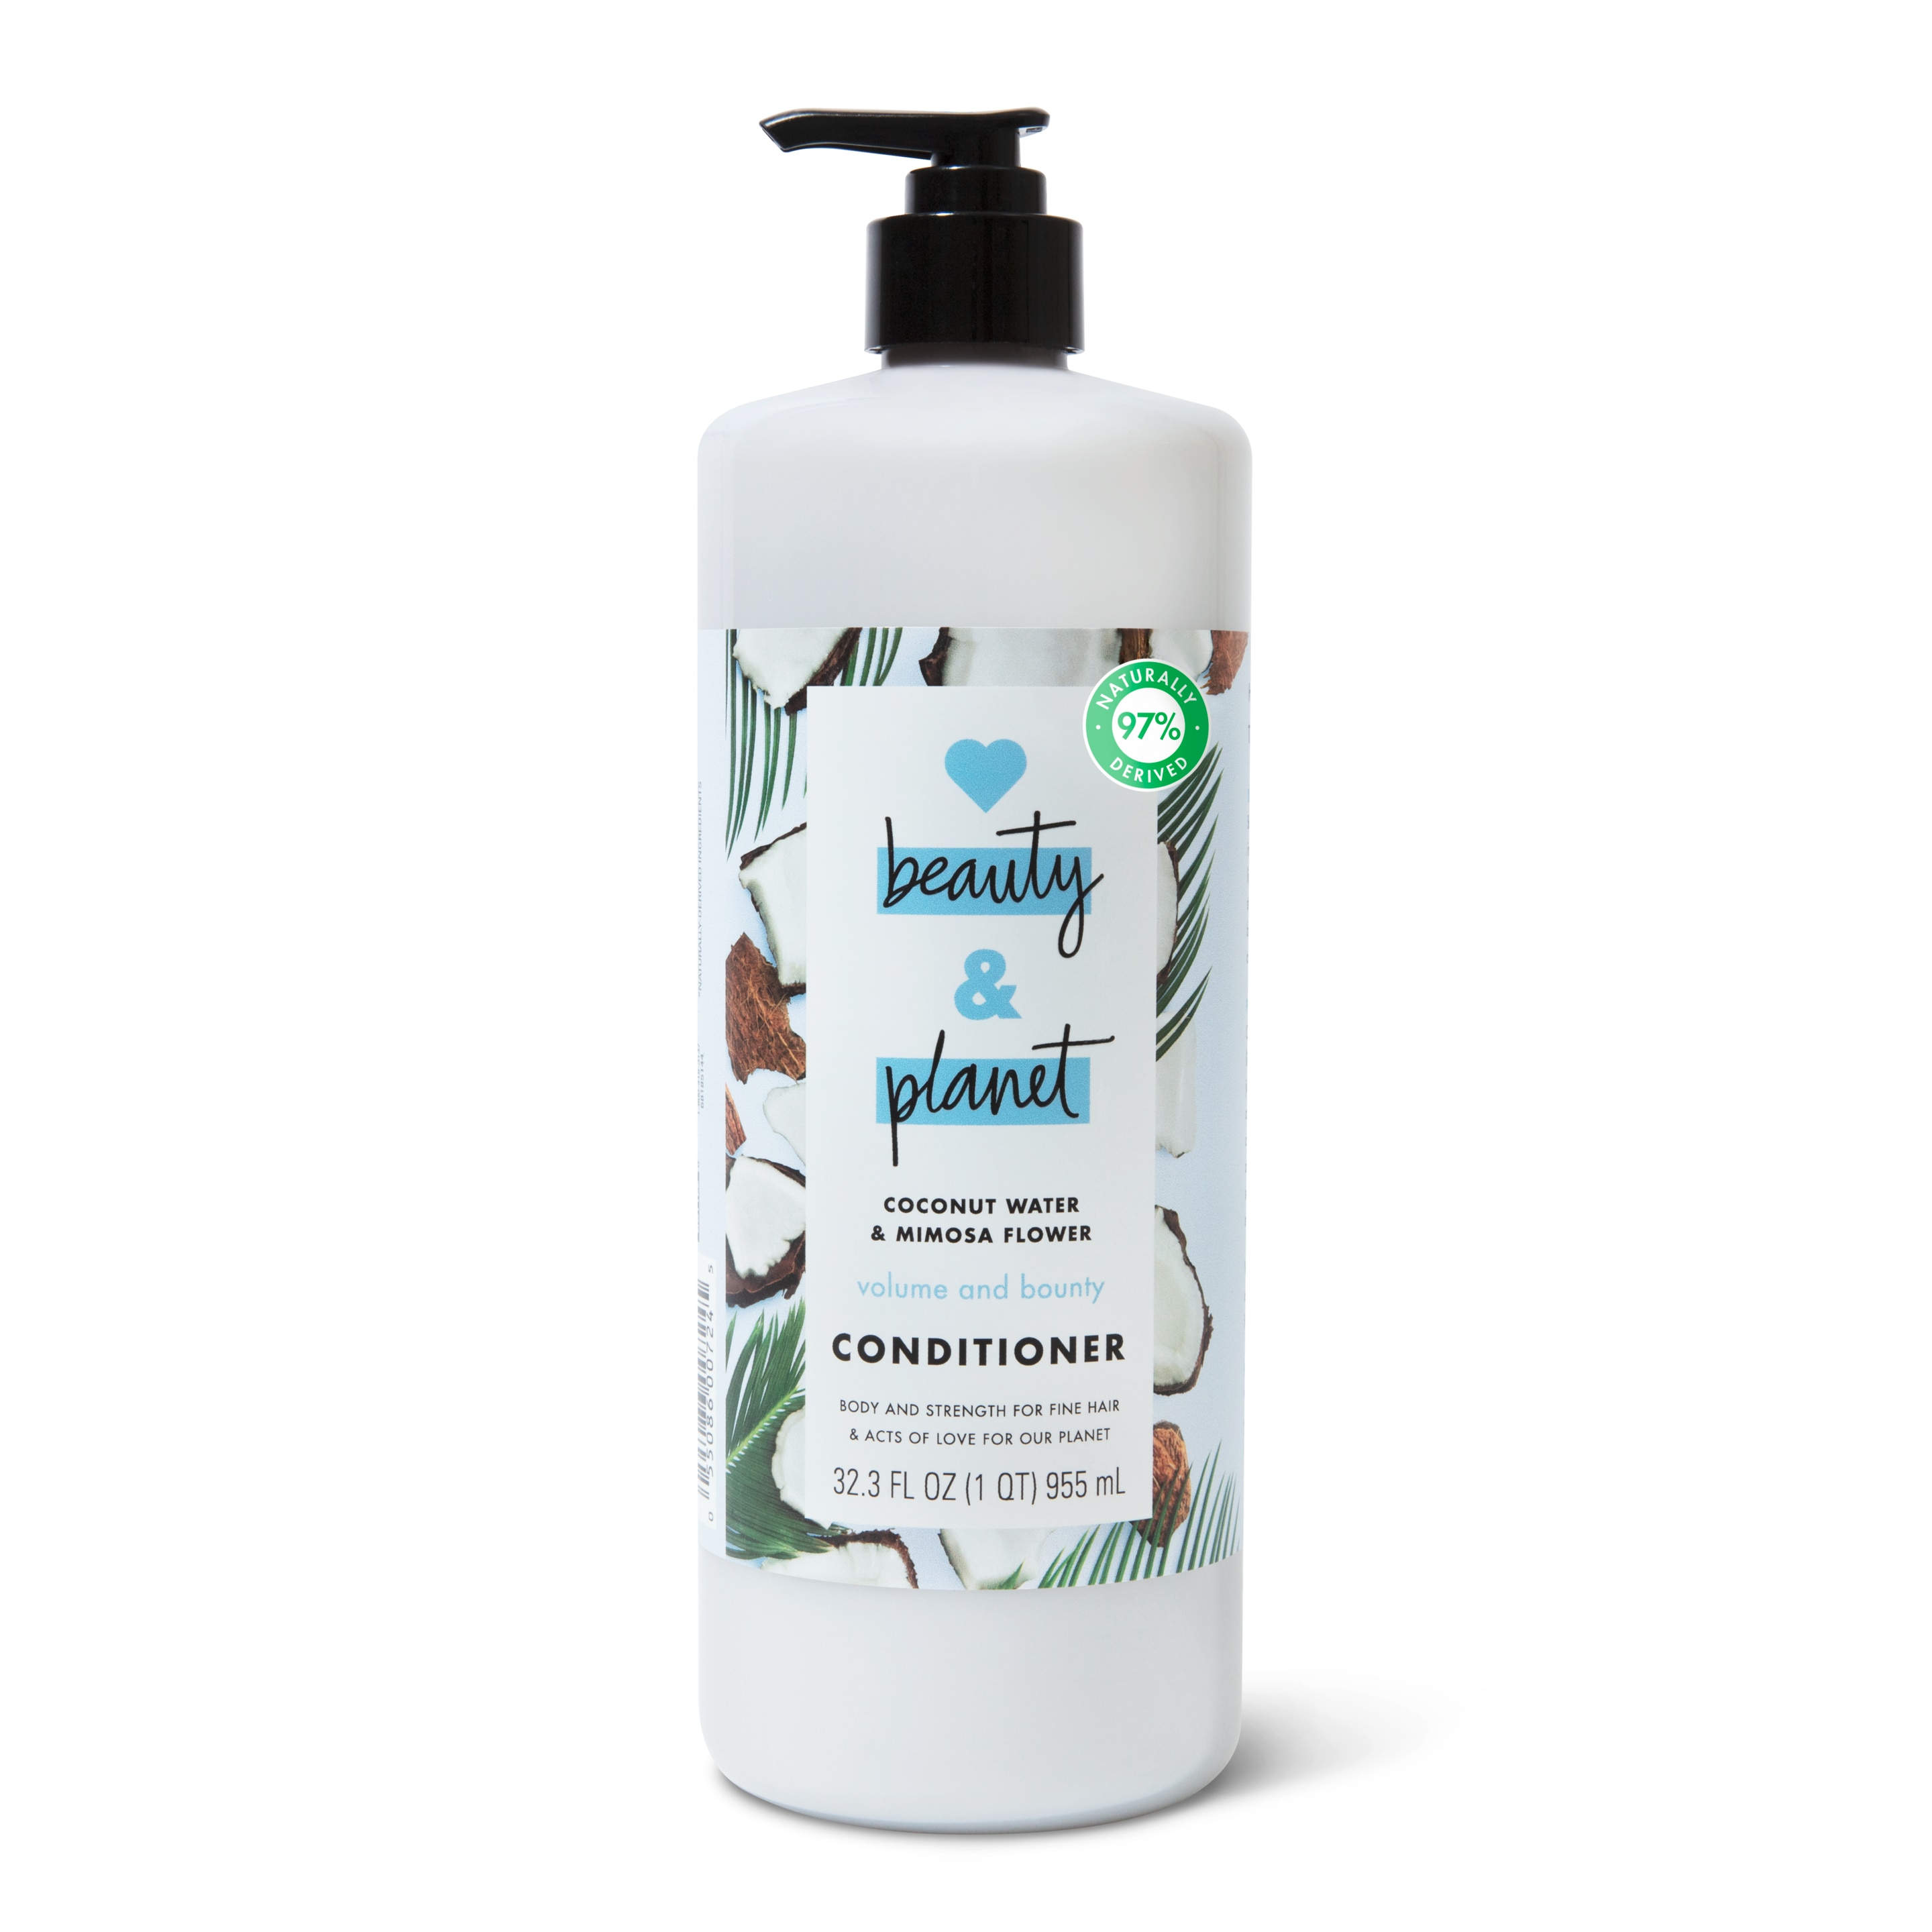 coconut water & mimosa flower conditioner reusable bottle